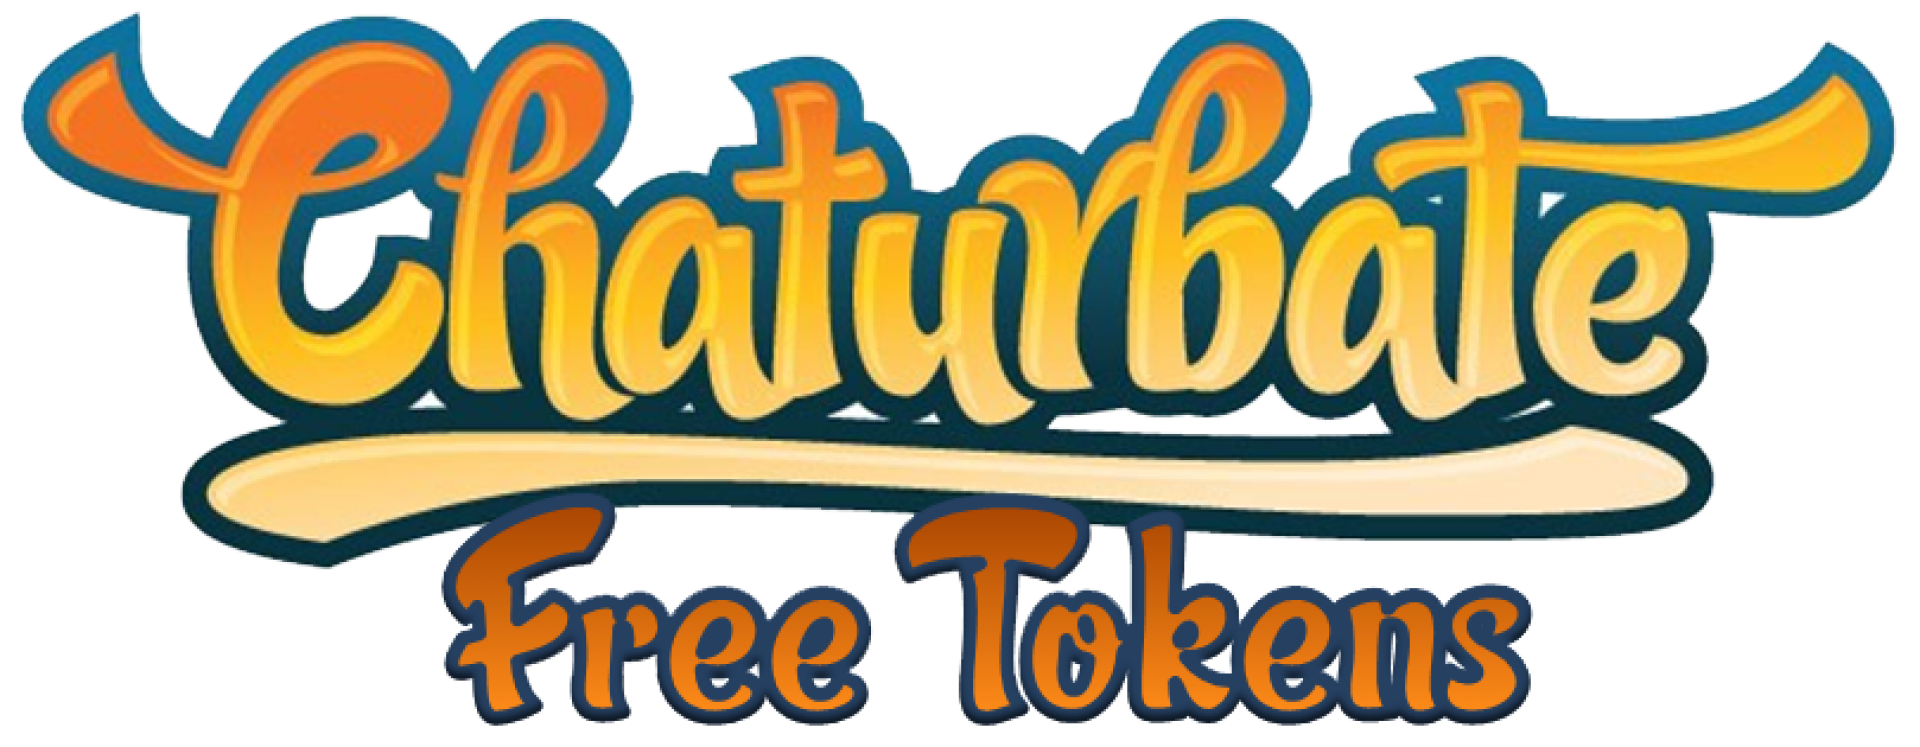 26 How To Get Free Chaturbate Tokens
10/2022